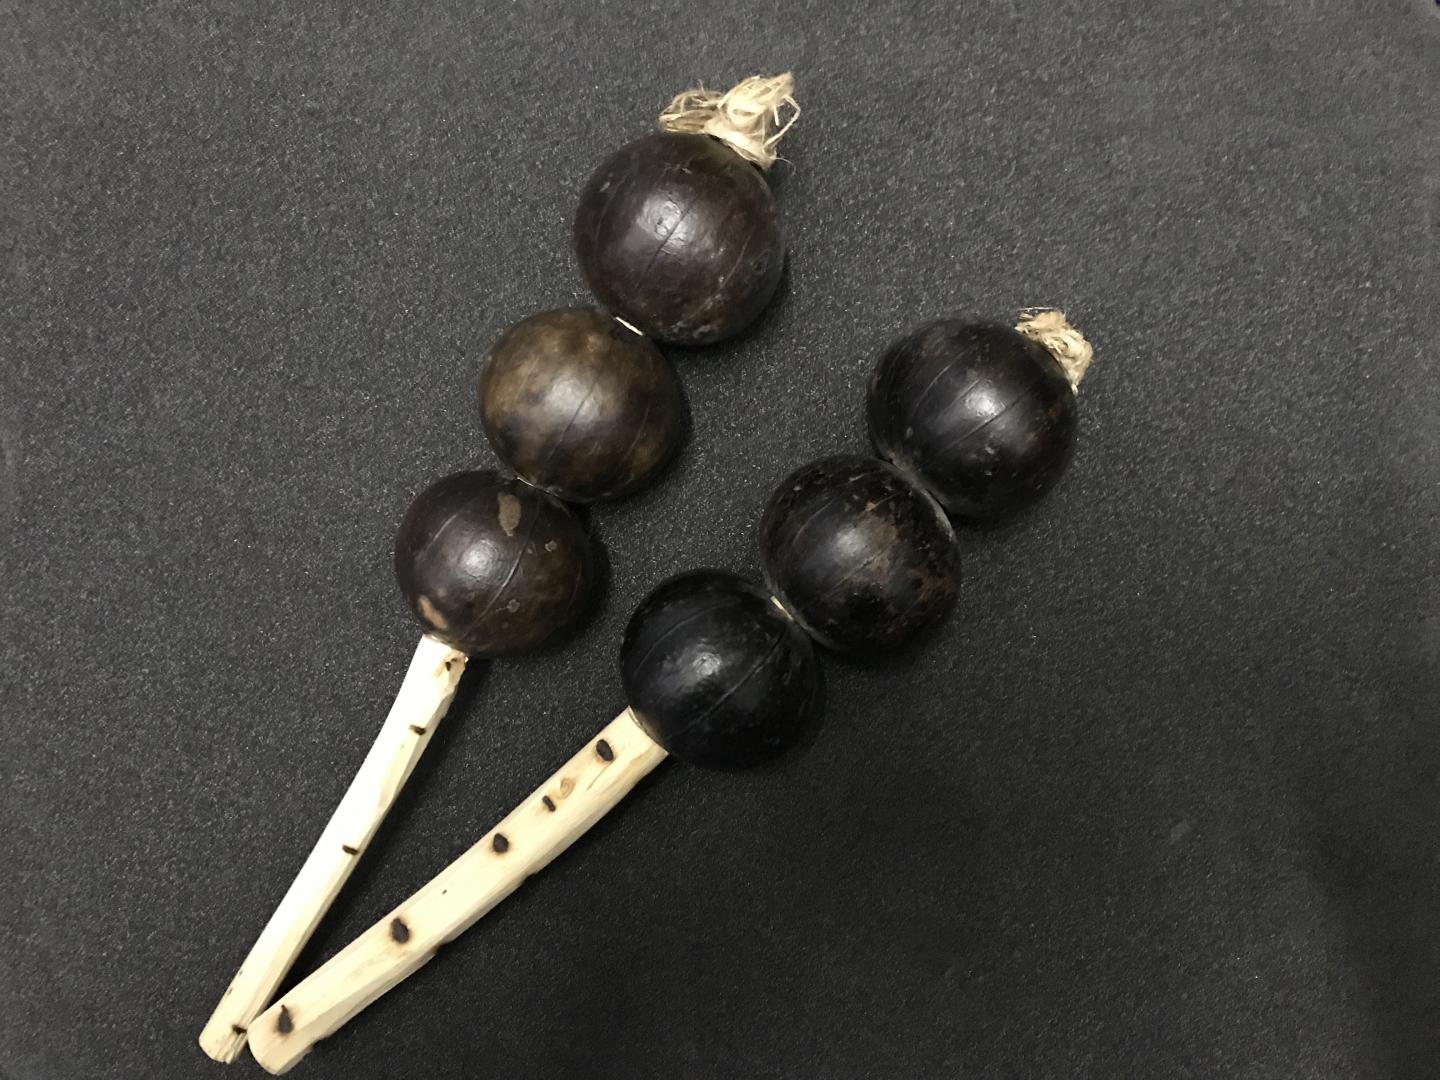 Two instruments made of three seed pods each on a stick.